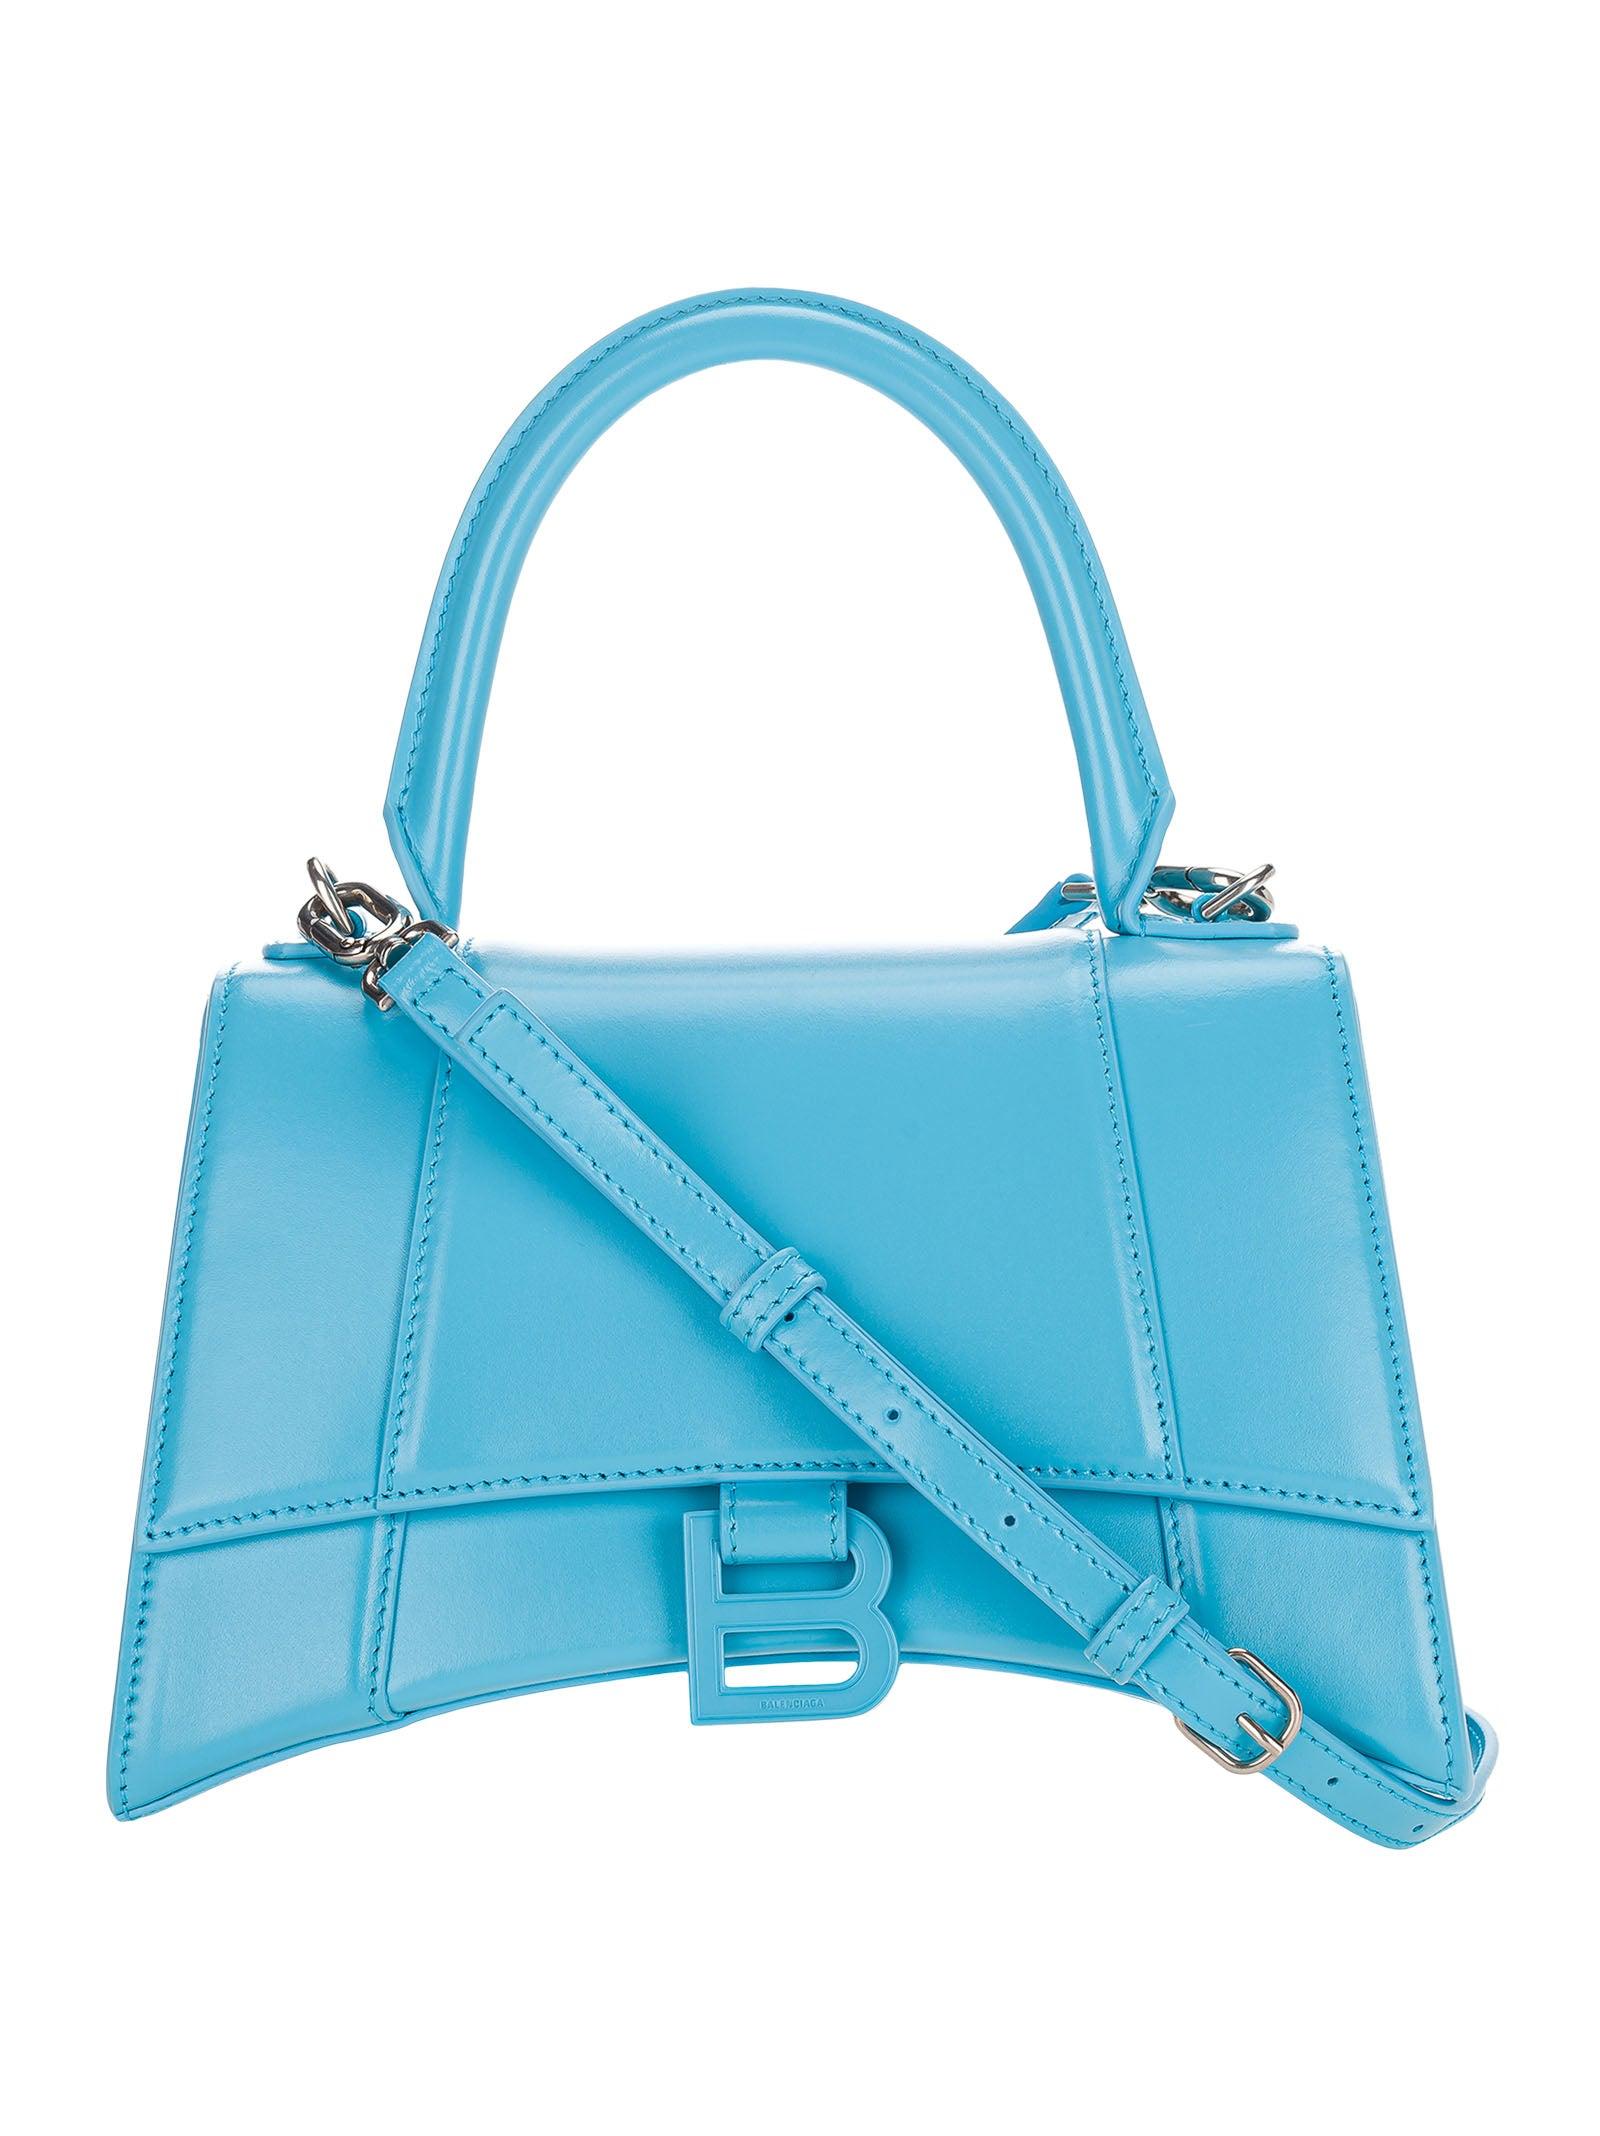 Balenciaga Hourglass Small Top Handle Bag in Blue | Lyst